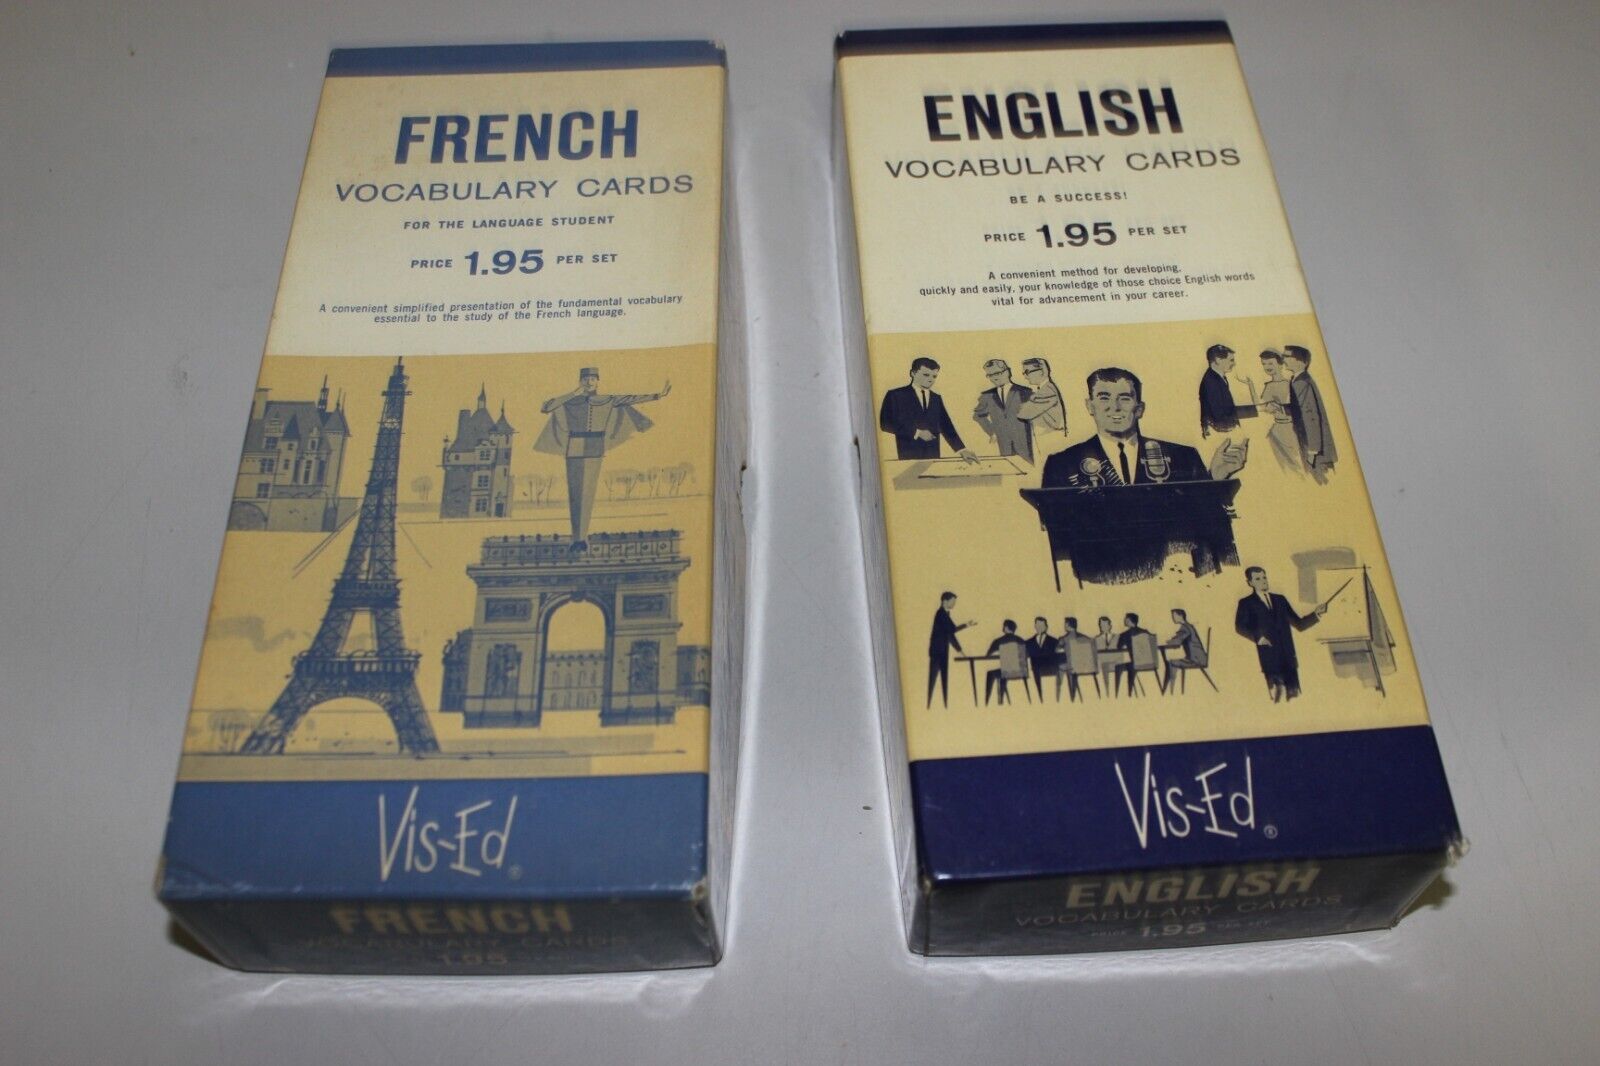 Vintage Vis-Ed French / English Vocabulary Cards